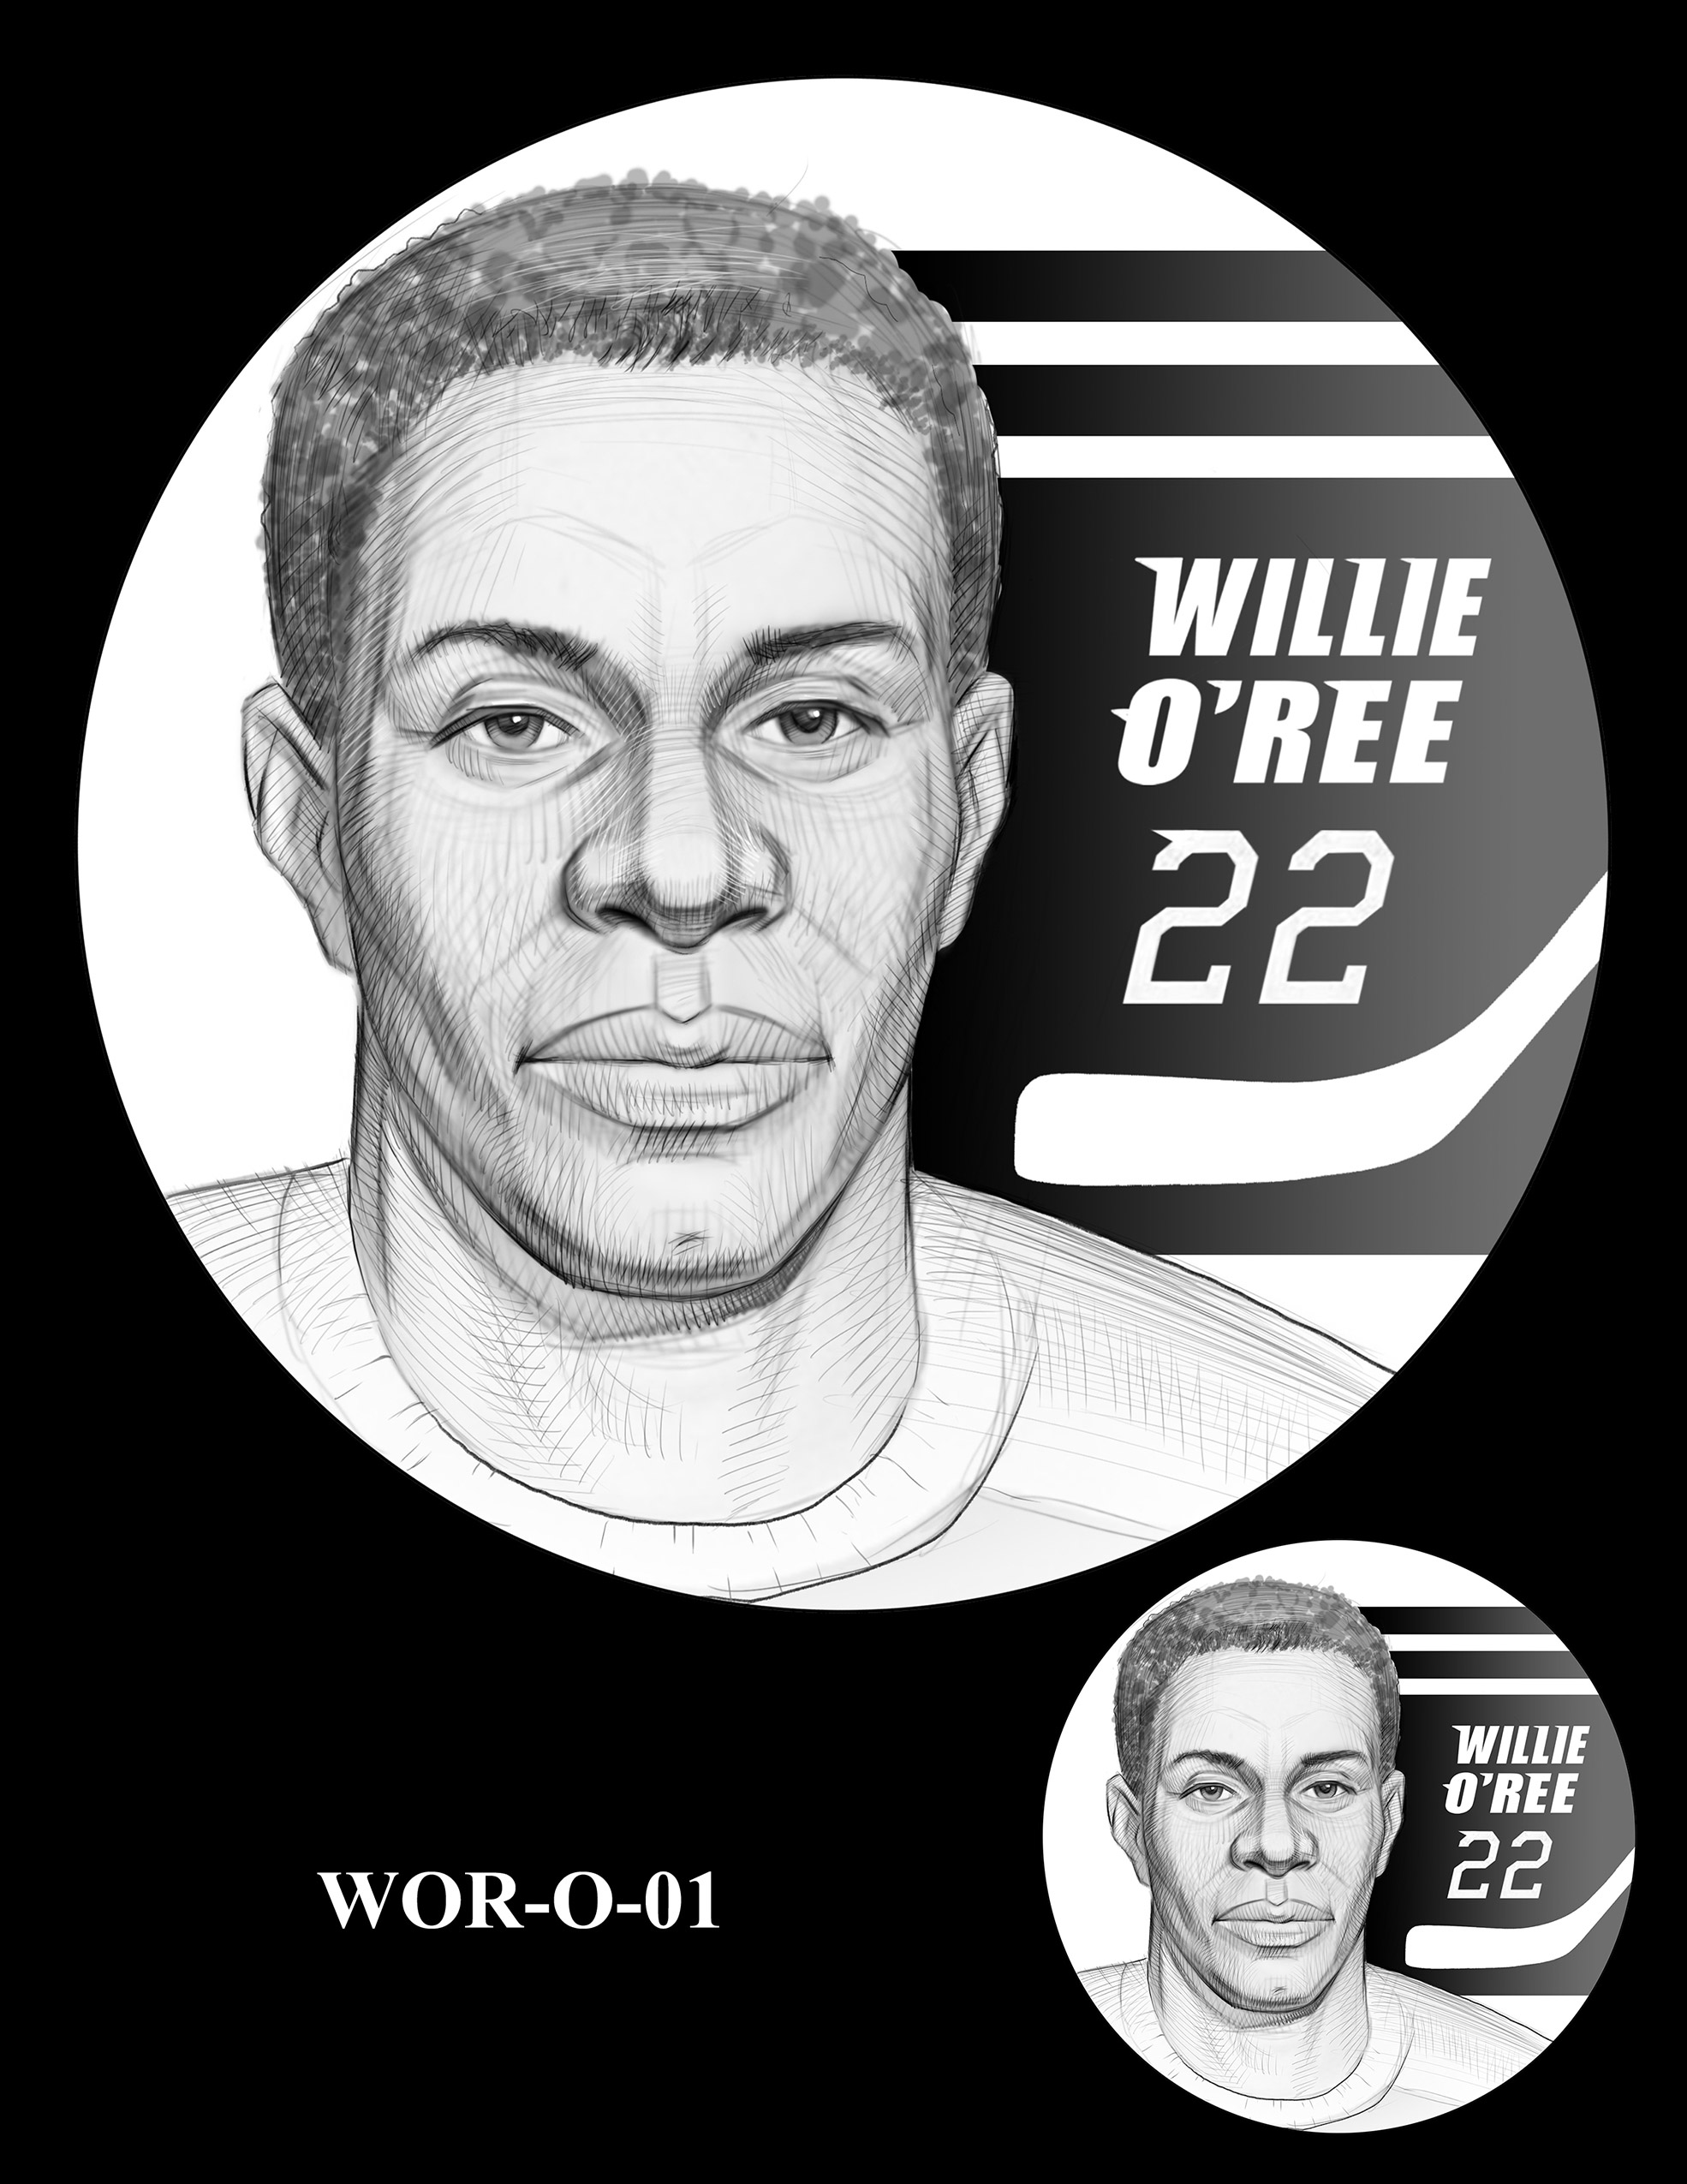 WOR-O-01 -- Willie O'Ree Congressional Gold Medal